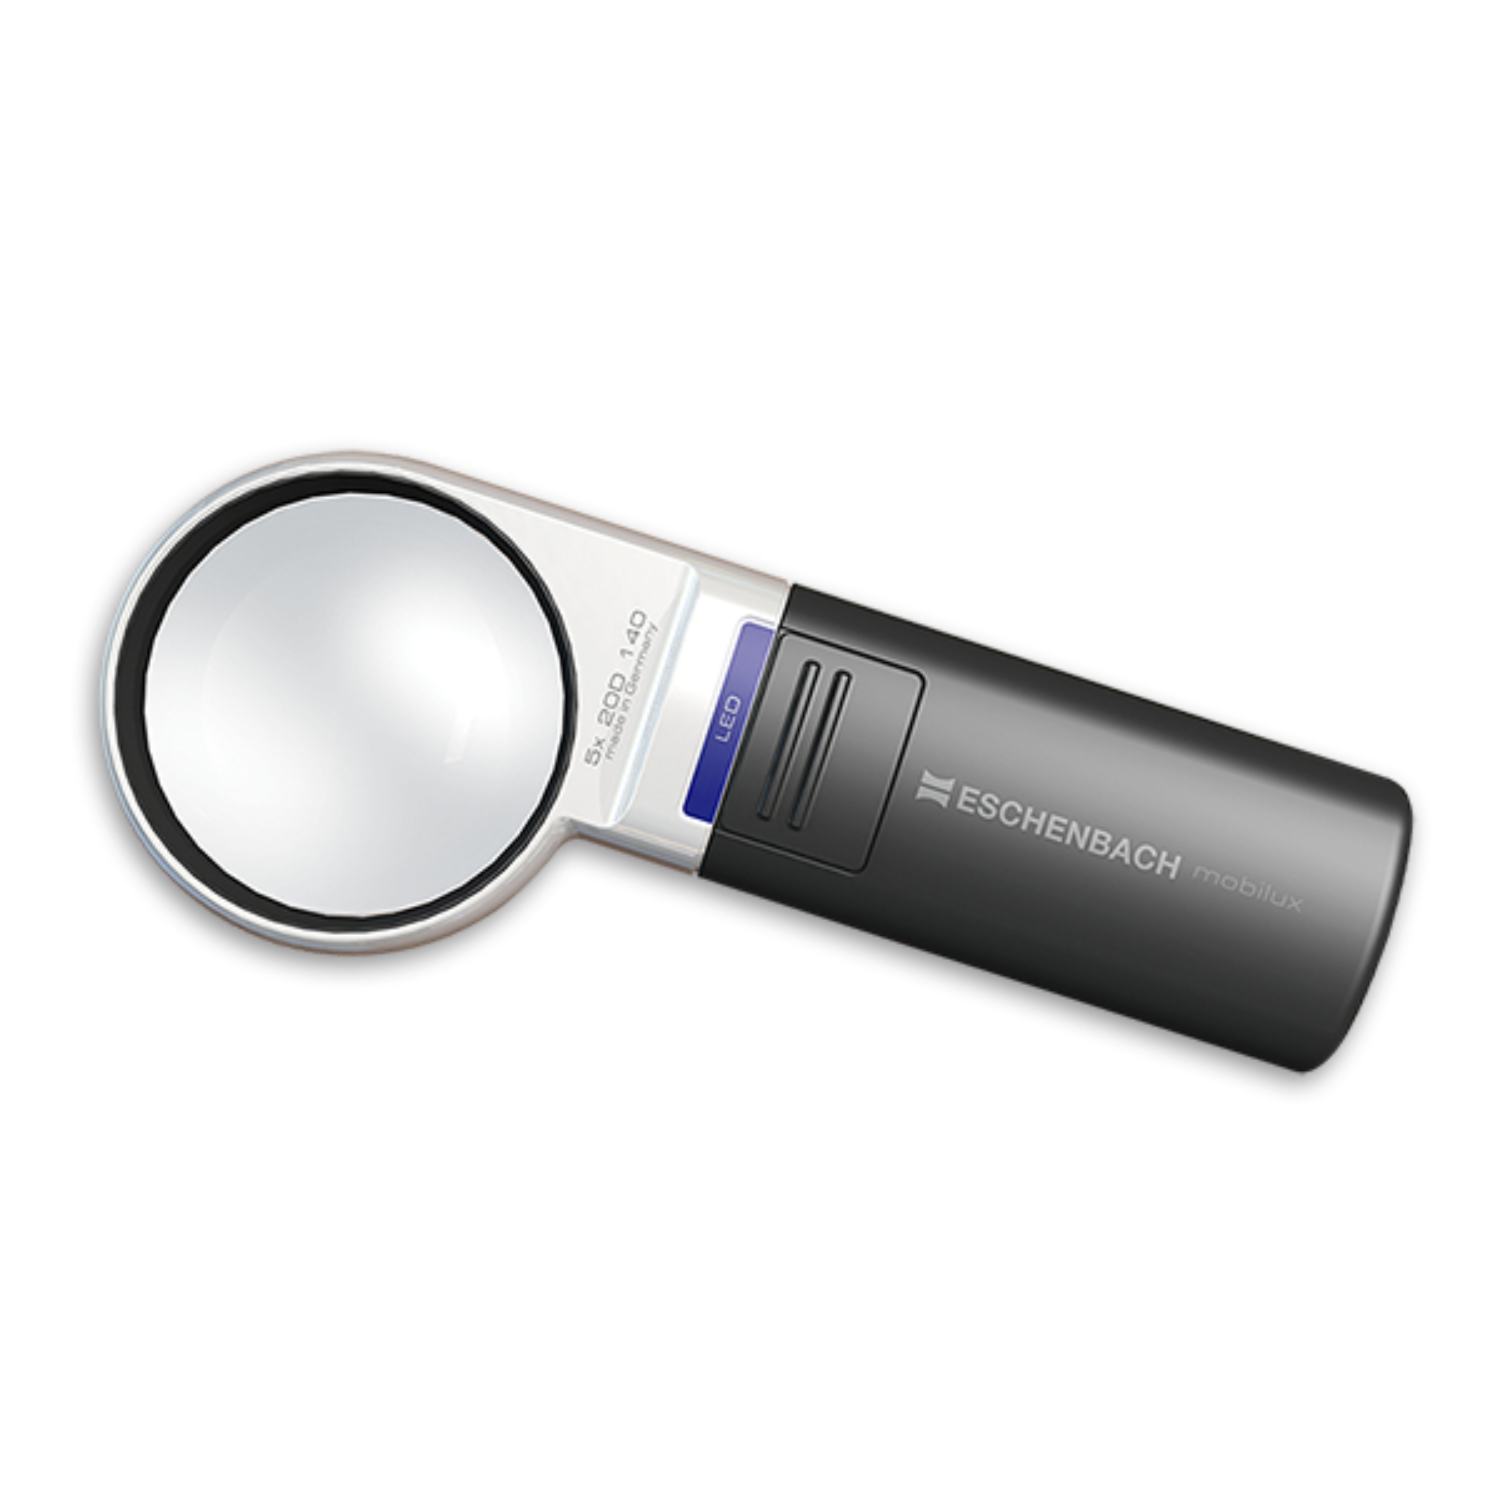 Image of 4x Mobilux® LED Round Hand-held Magnifier from Eschenbach Optiks